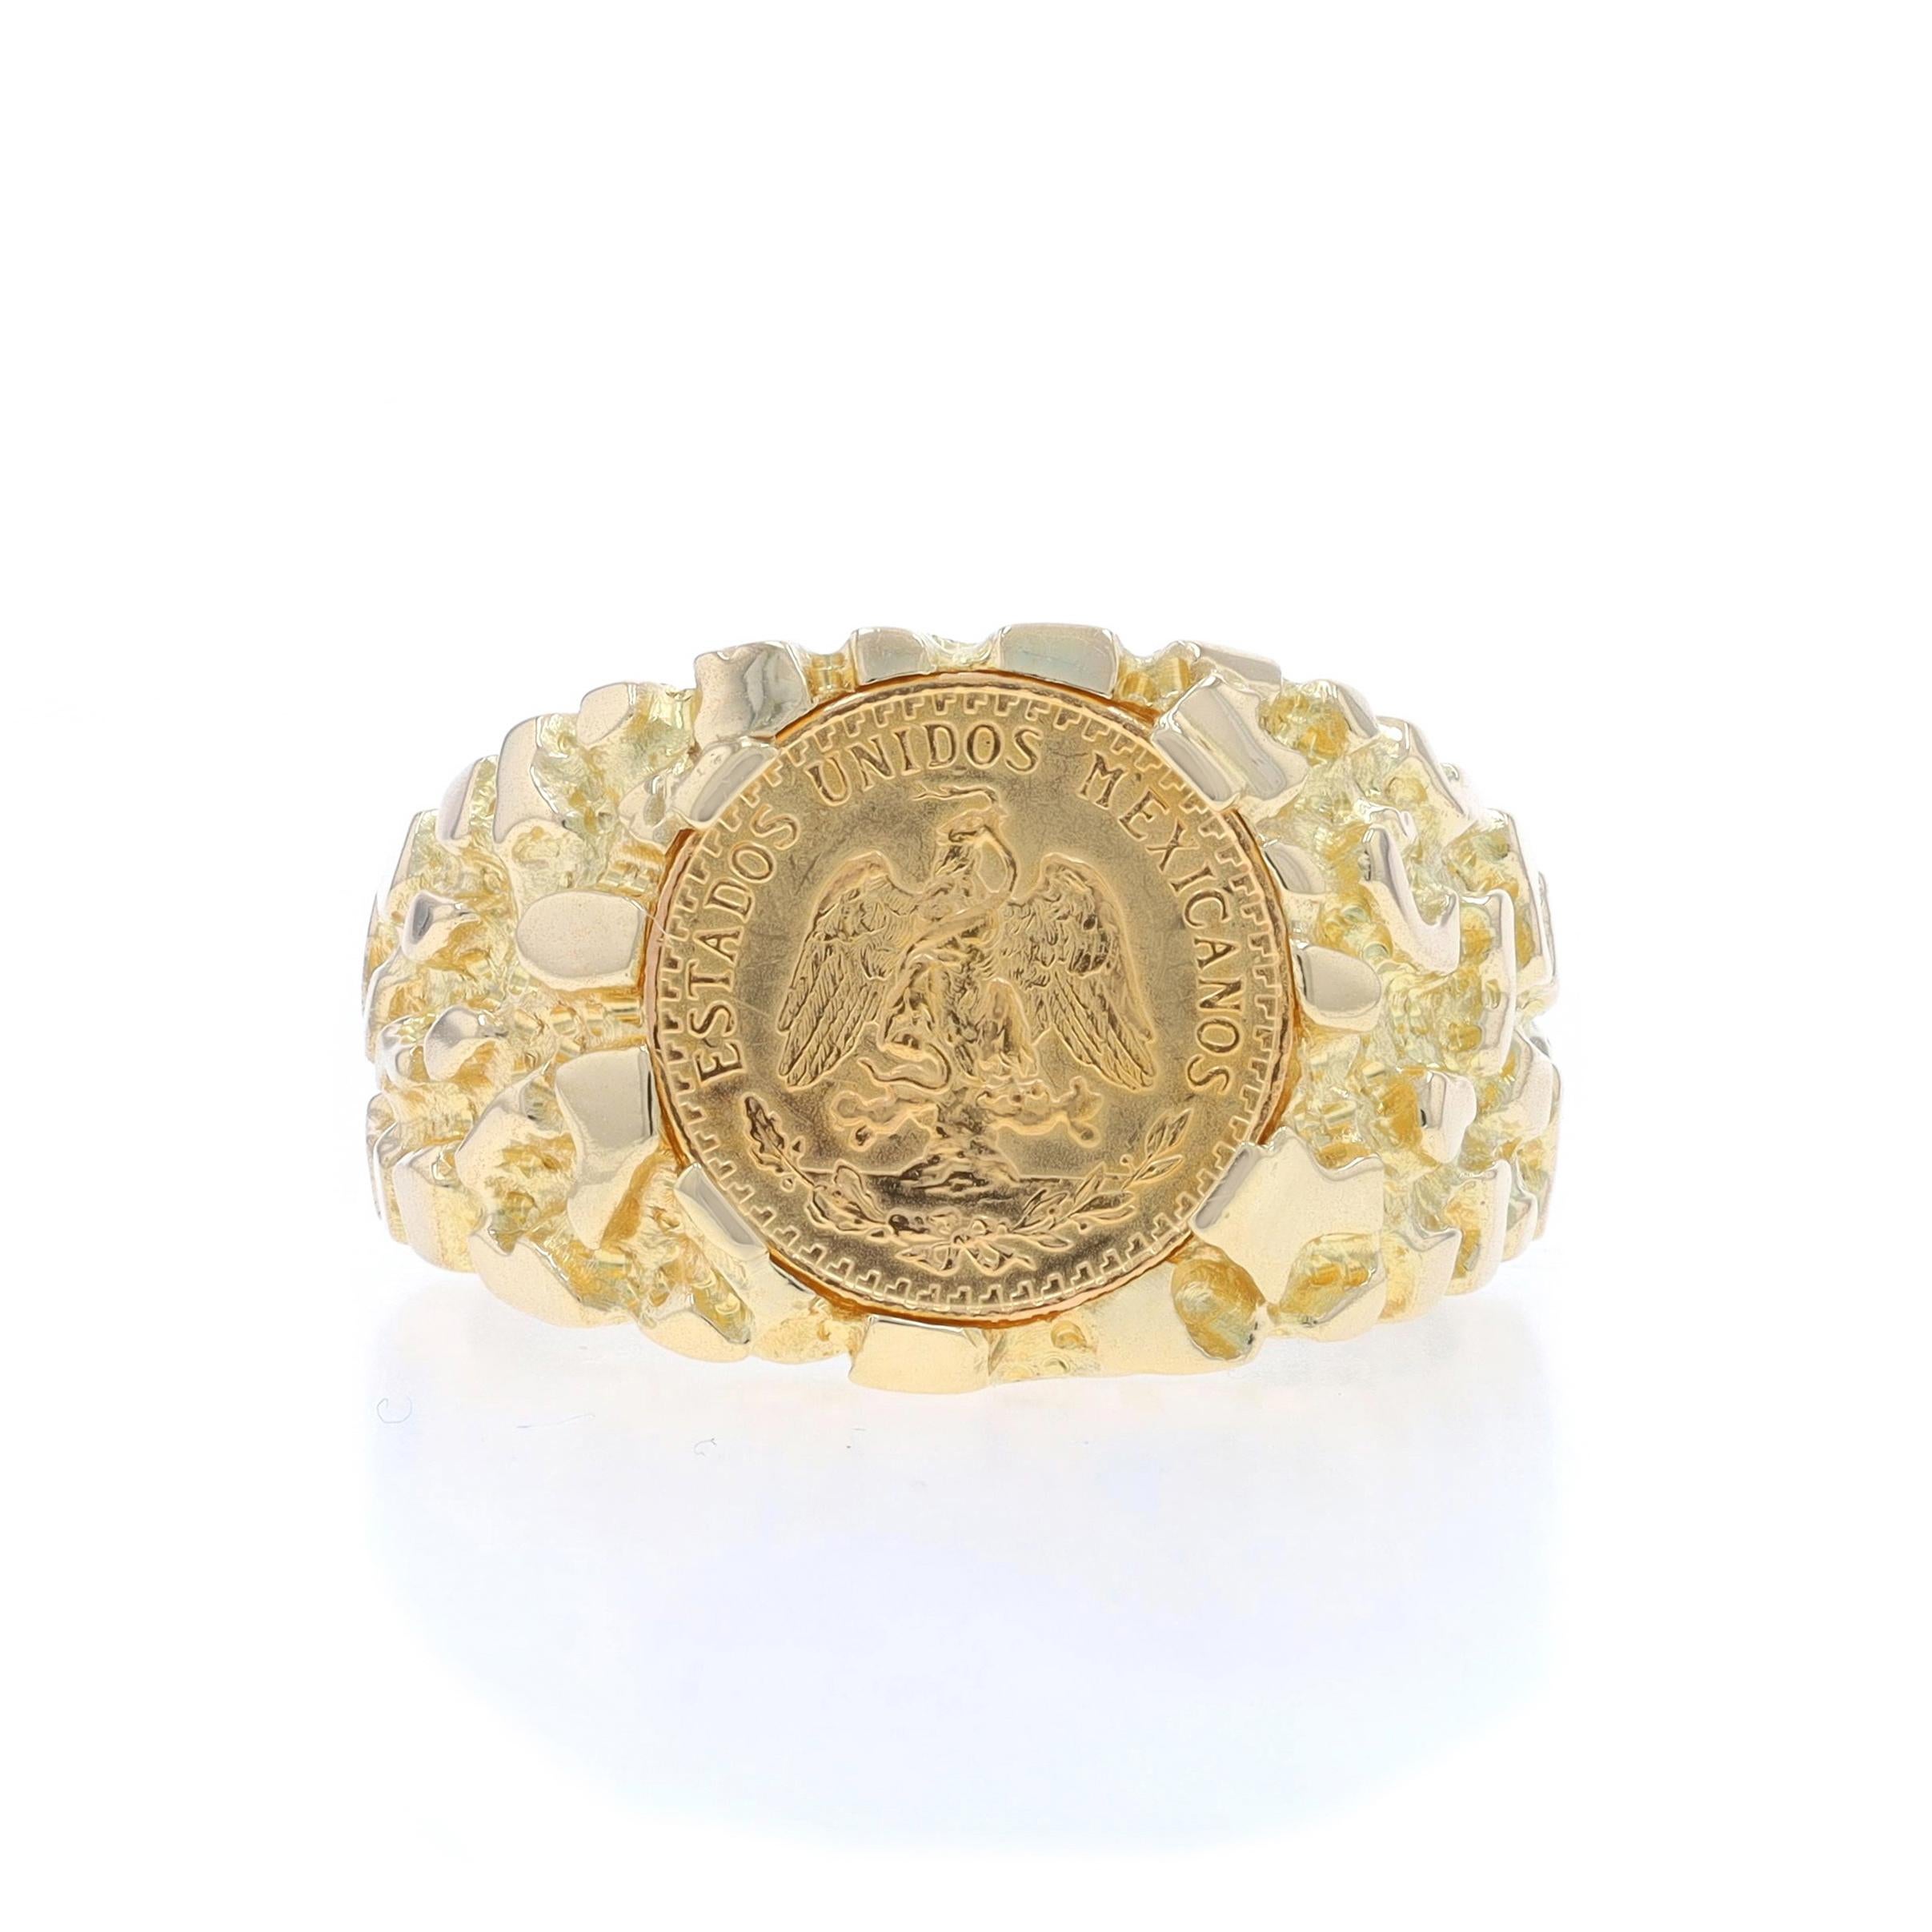 Size: 10 3/4
Sizing Fee: Up 2 sizes for $60 or Down 1 size for $40

Metal Content: 14k Yellow Gold (ring) & 90% Fine Gold (coin)

Features: Nugget-Textured Detailing

Measurements

Face Height (north to south): 5/8